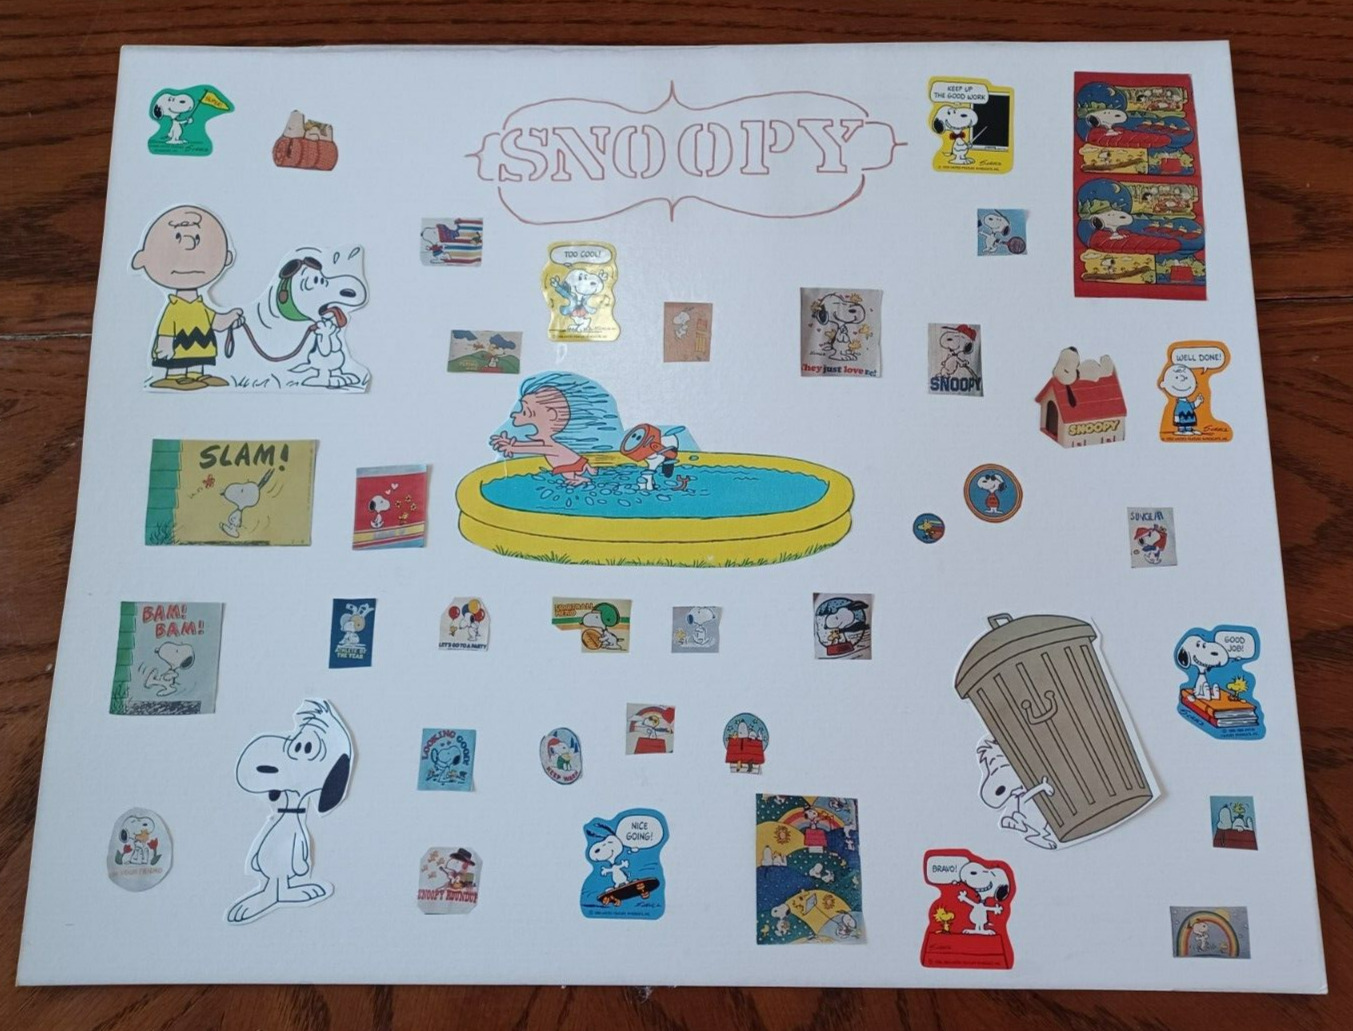 Homemade Peanuts Snoopy Sticker Collage 20 x 16 Poster Doghouse Vintage